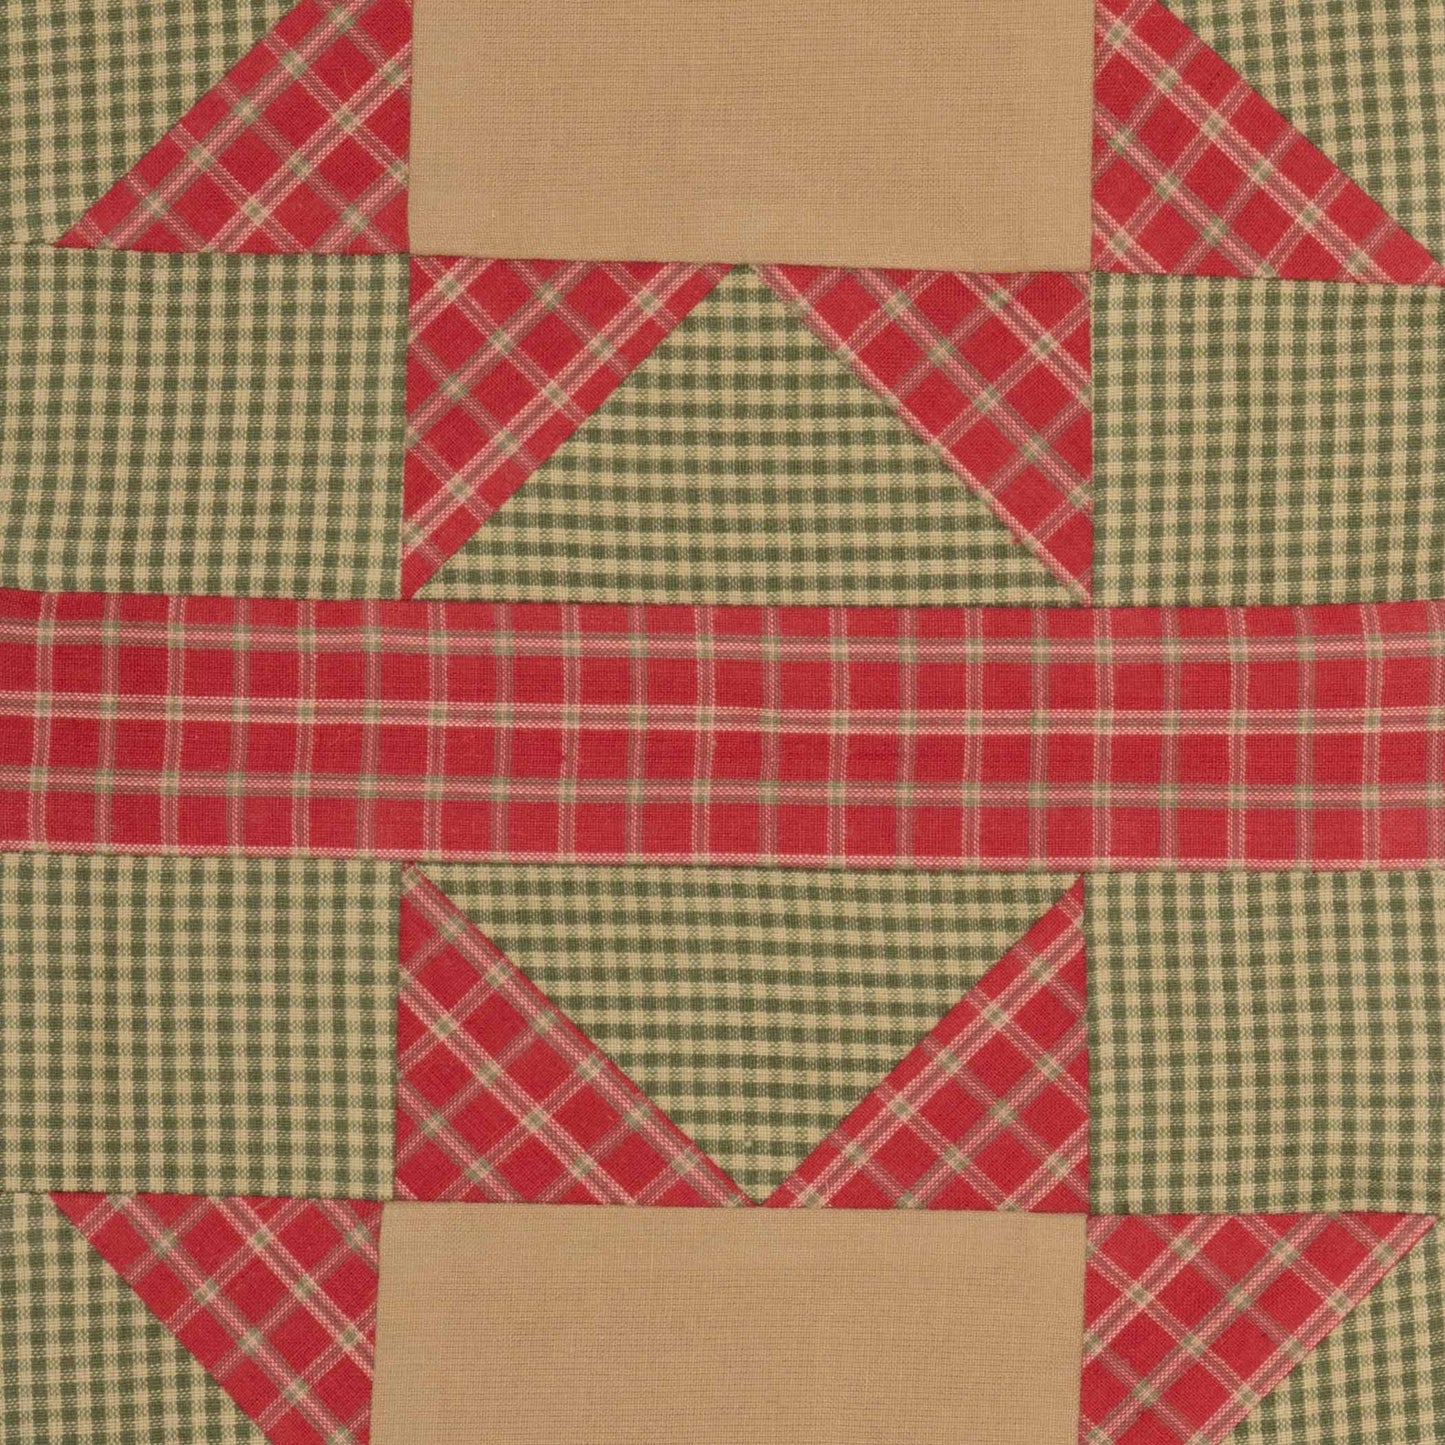 42477-Dolly-Star-Green-Patch-Stocking-12x20-image-3